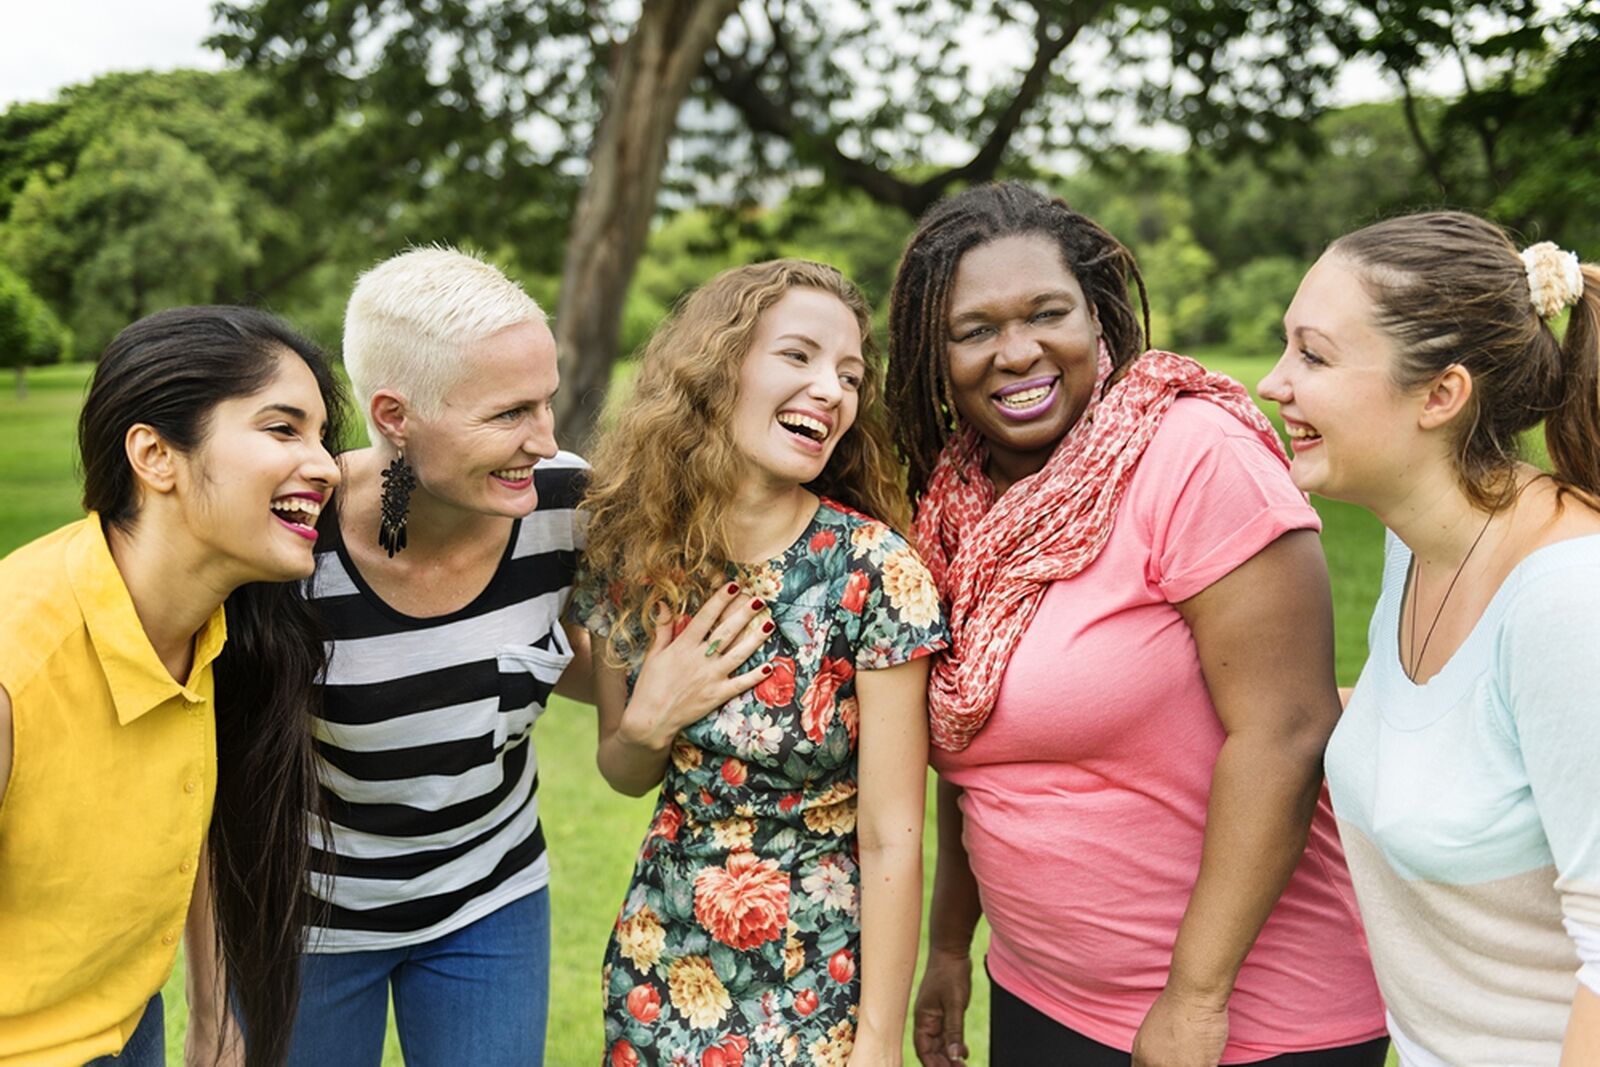 Five women standing together laughing outside in a park